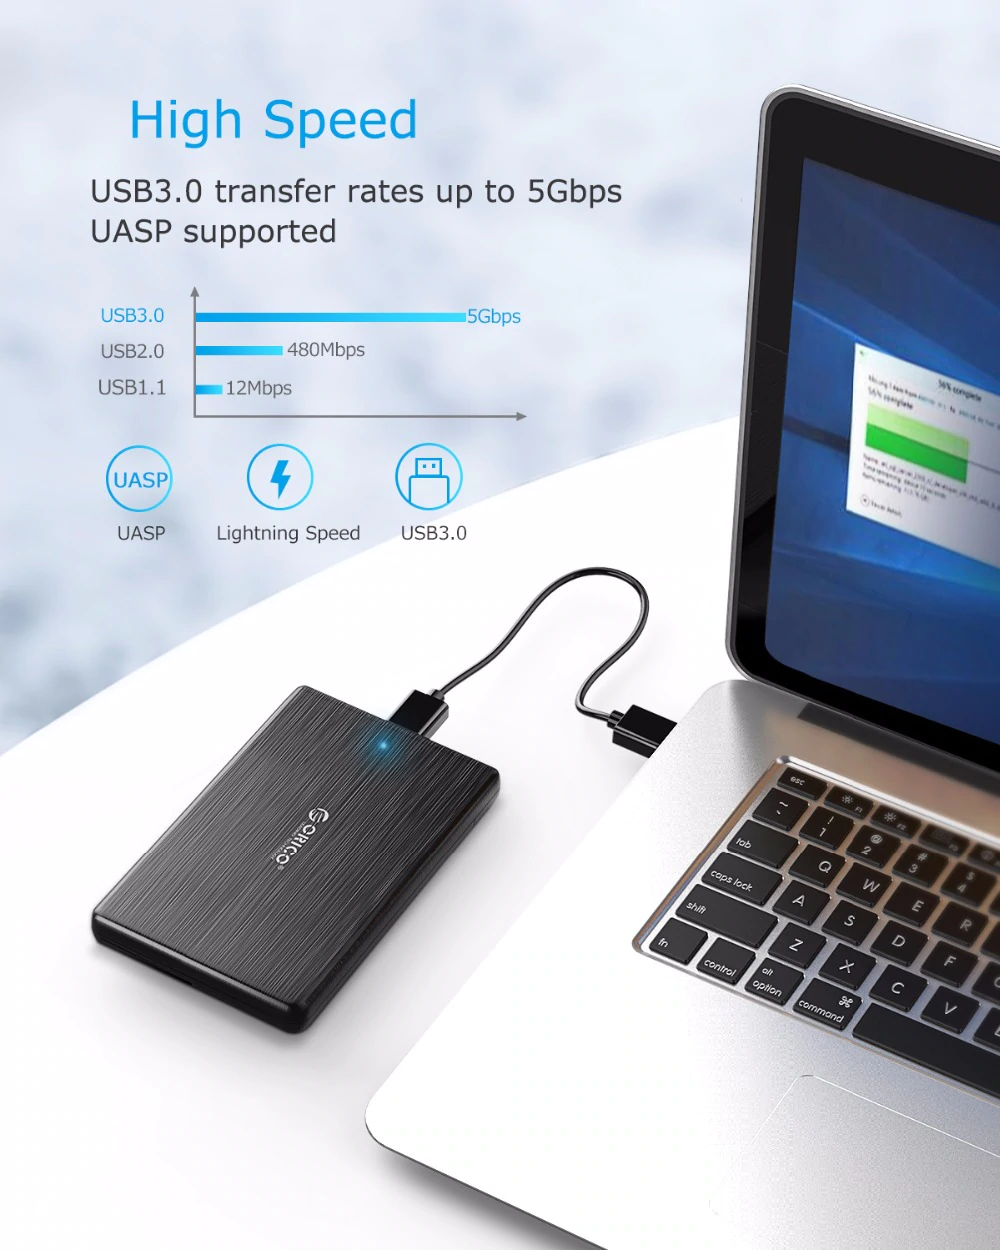 External 2.5-inch SATA to USB 3.0 hard drive enclosure from ORICO for SSD and HDD, UASP support